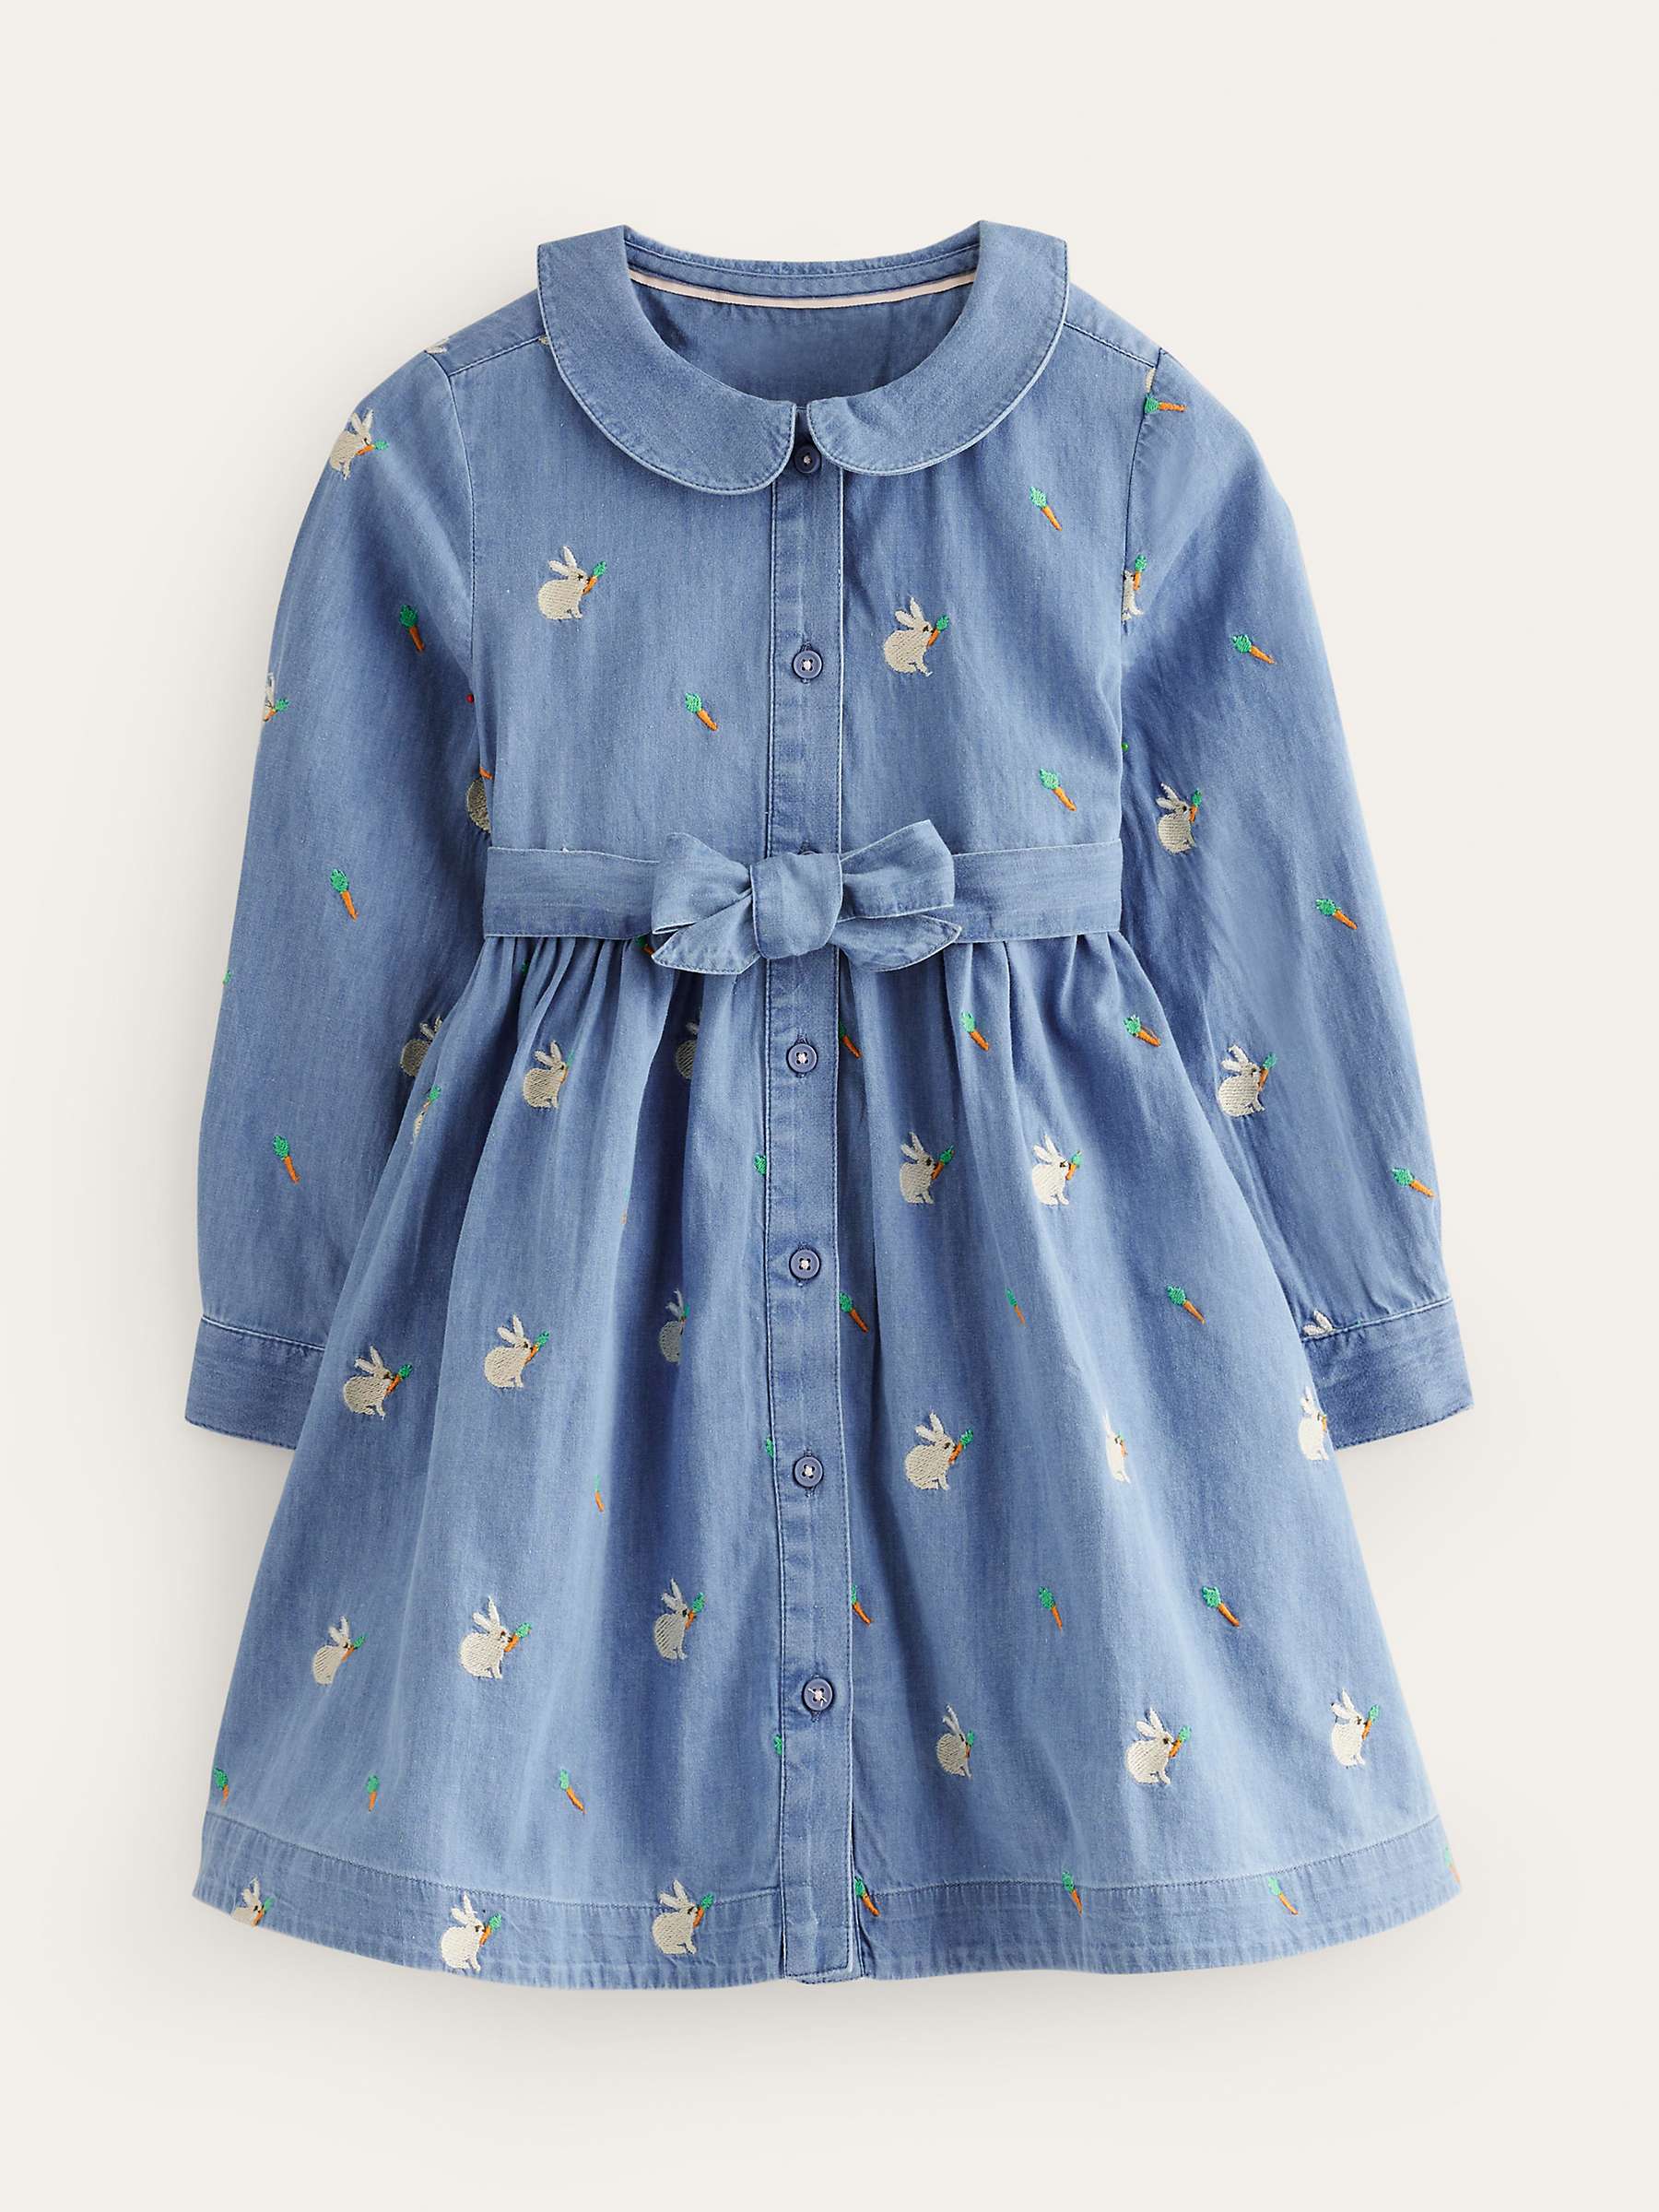 Buy Mini Boden Kids' Embroidered Bunnies Shirt Dress, Blue Chambray Online at johnlewis.com